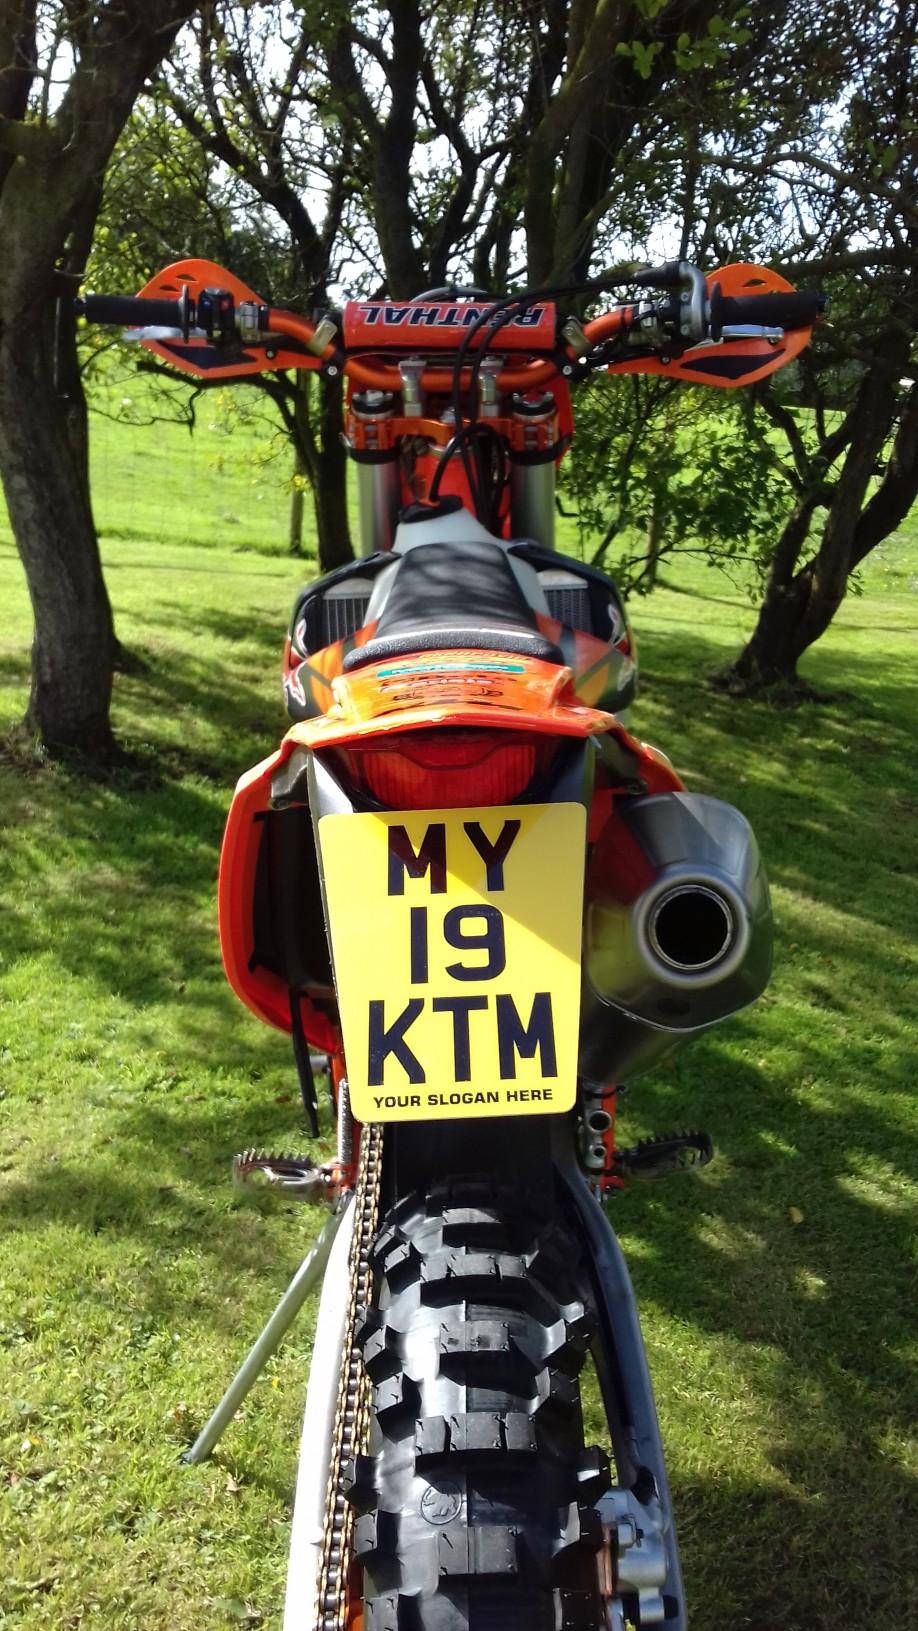 7" x 6" SHOW NUMBER PLATE OFF ROAD KTM EXC ENDURO MOTORCYCLE MOTORBIKE FLEXI 